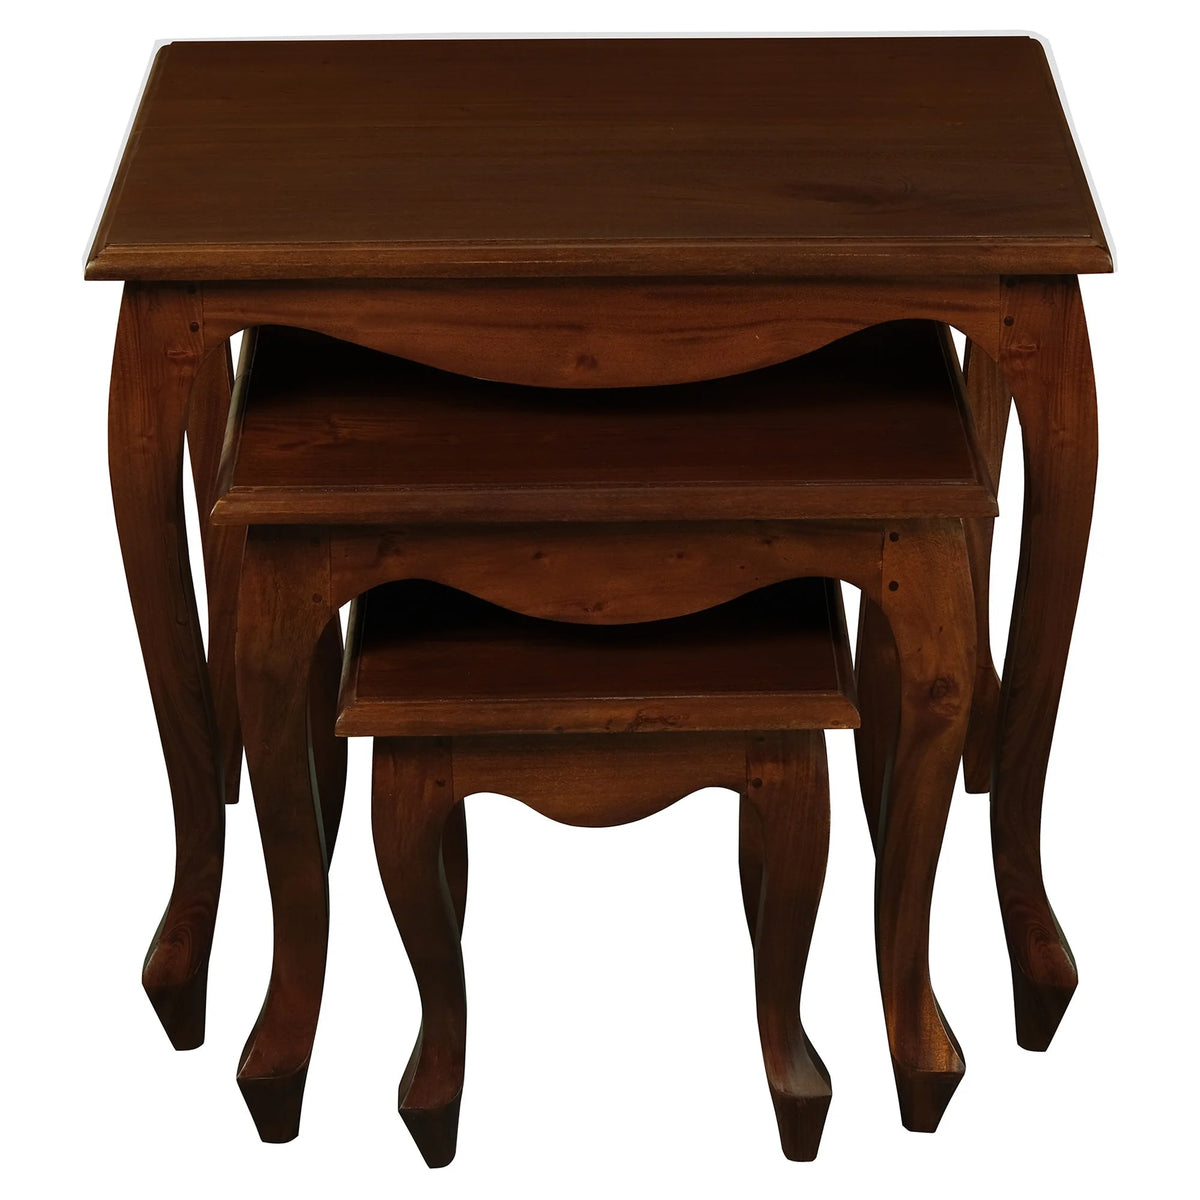 Set of 3 Queen Ann Timber Nested Tables - Mahogany - Notbrand